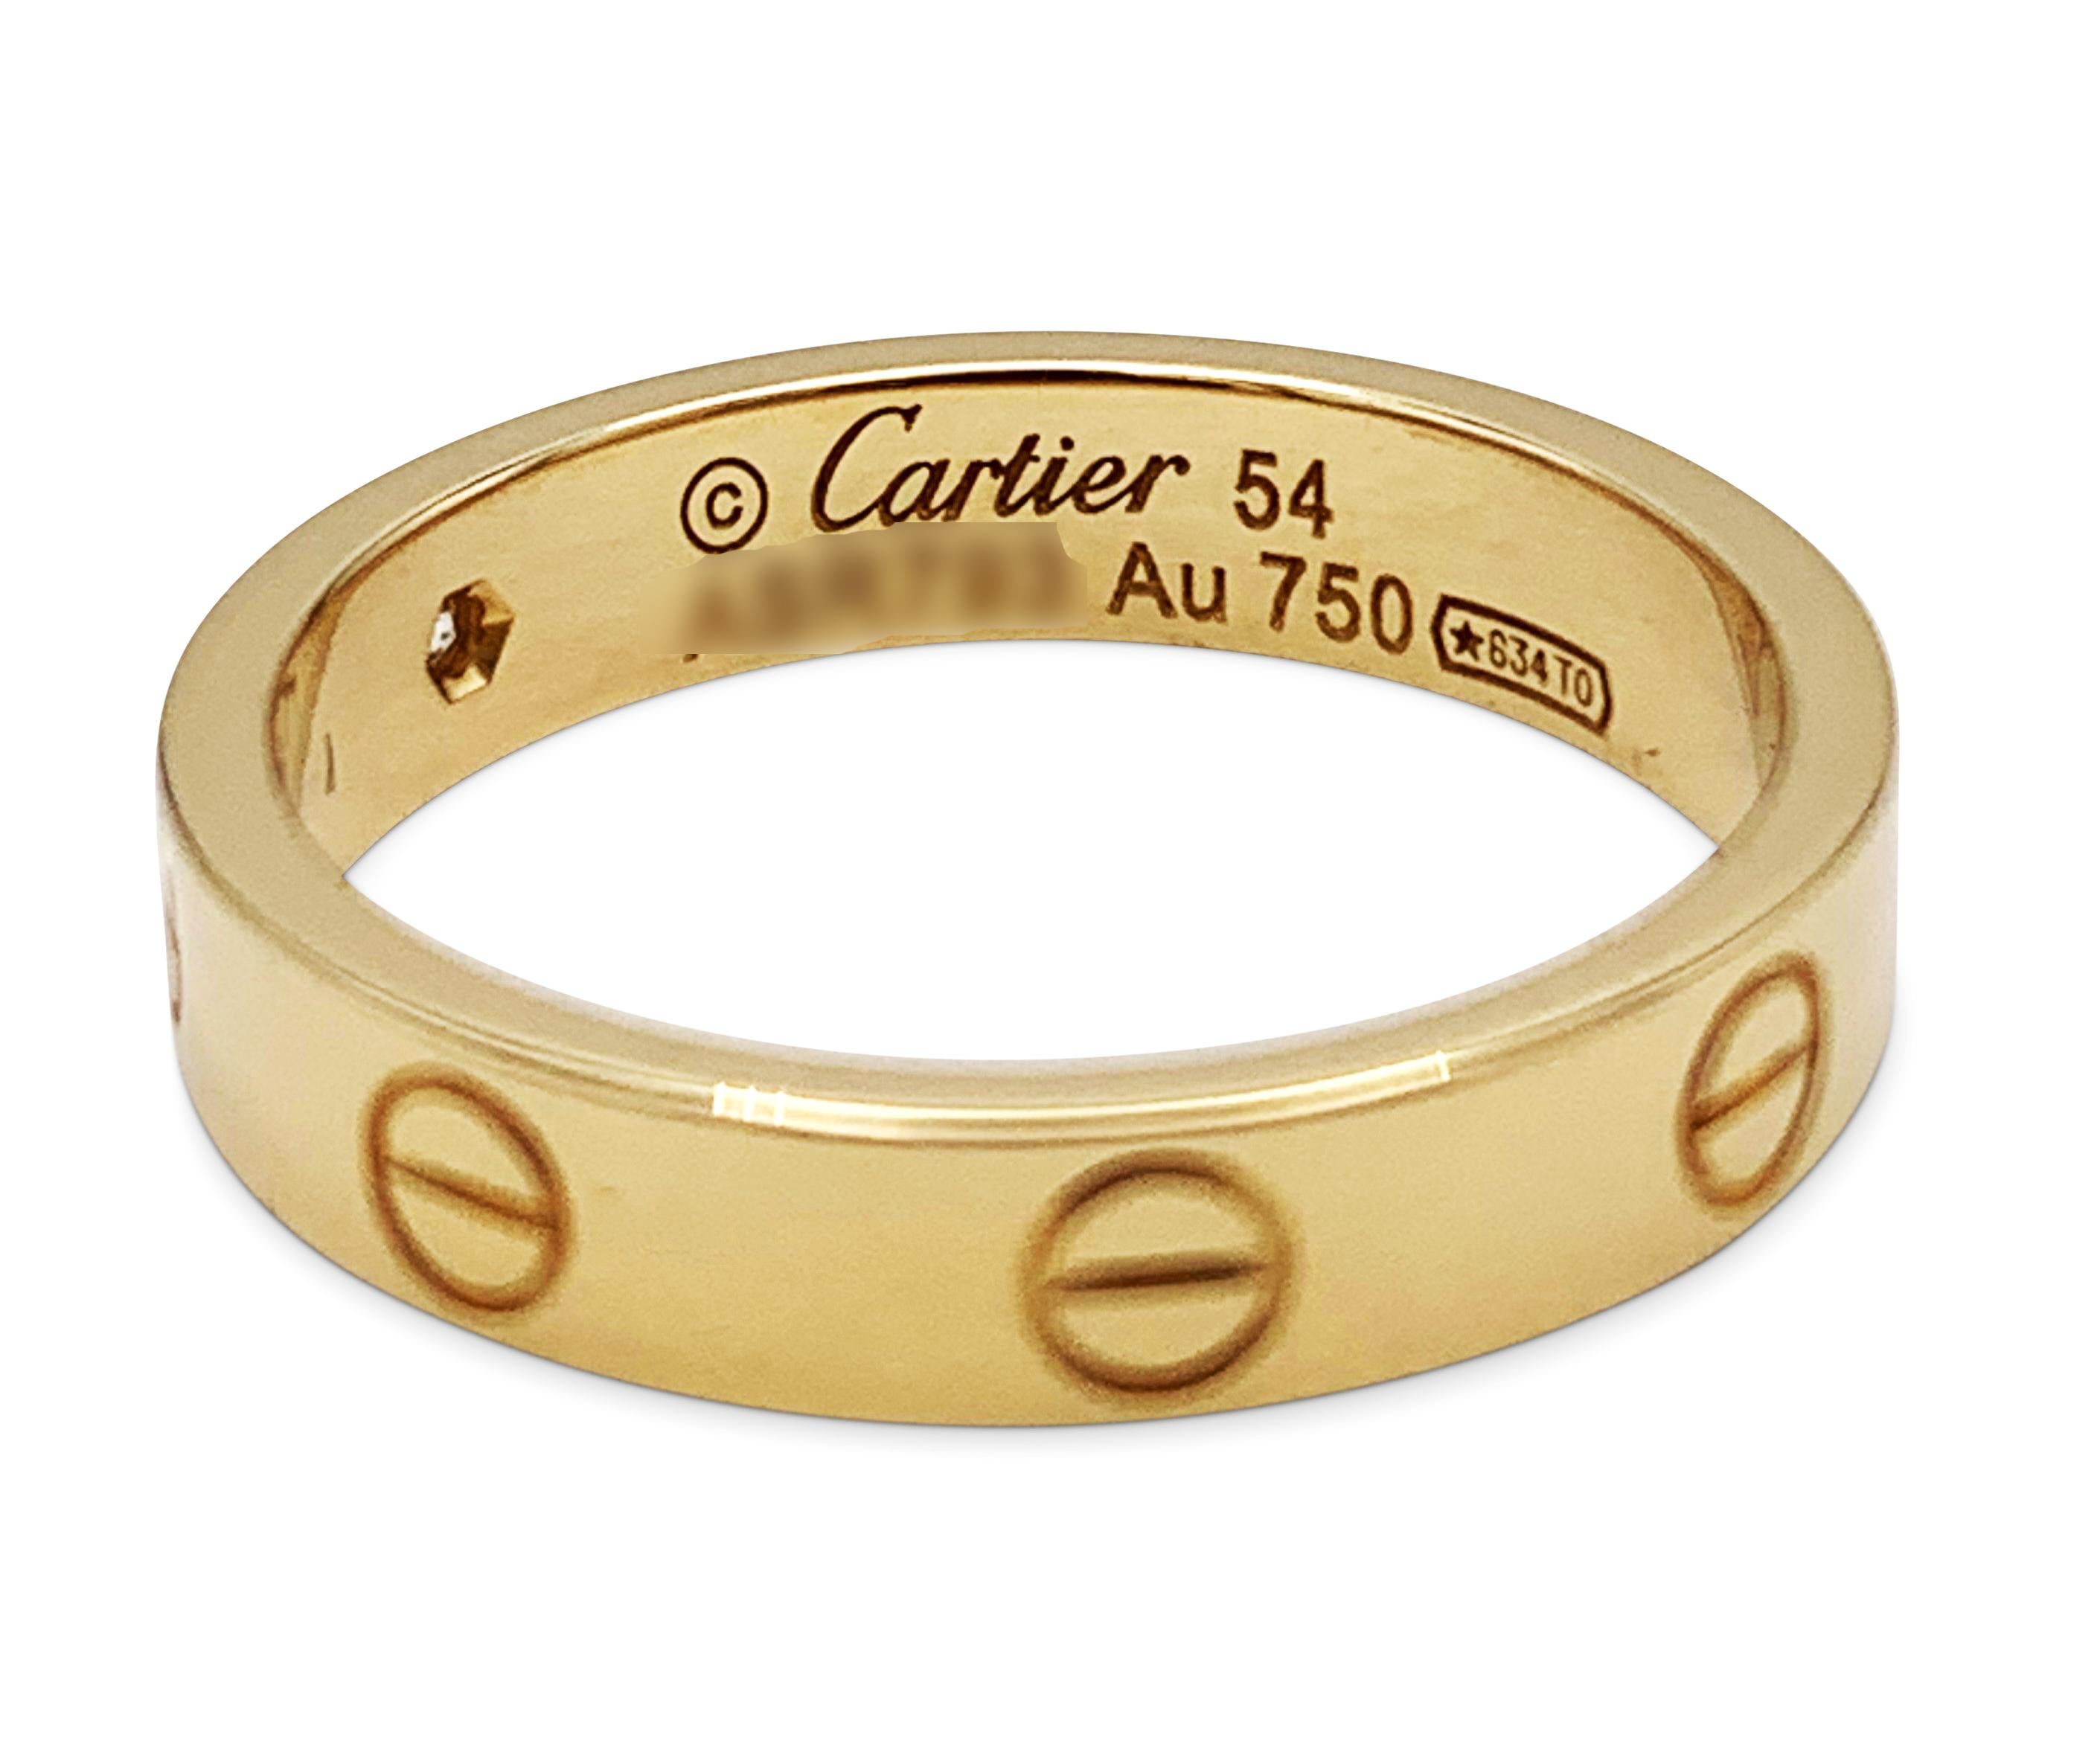 Authentic Cartier Love Ring crafted in 18 karat yellow gold and features 1 round brilliant diamond weighing an estimated .04ct.  Signed Cartier, 54, Au750, with serial number and hallmarks.  Size 54, US size 6 3/4.  The ring is not presented with